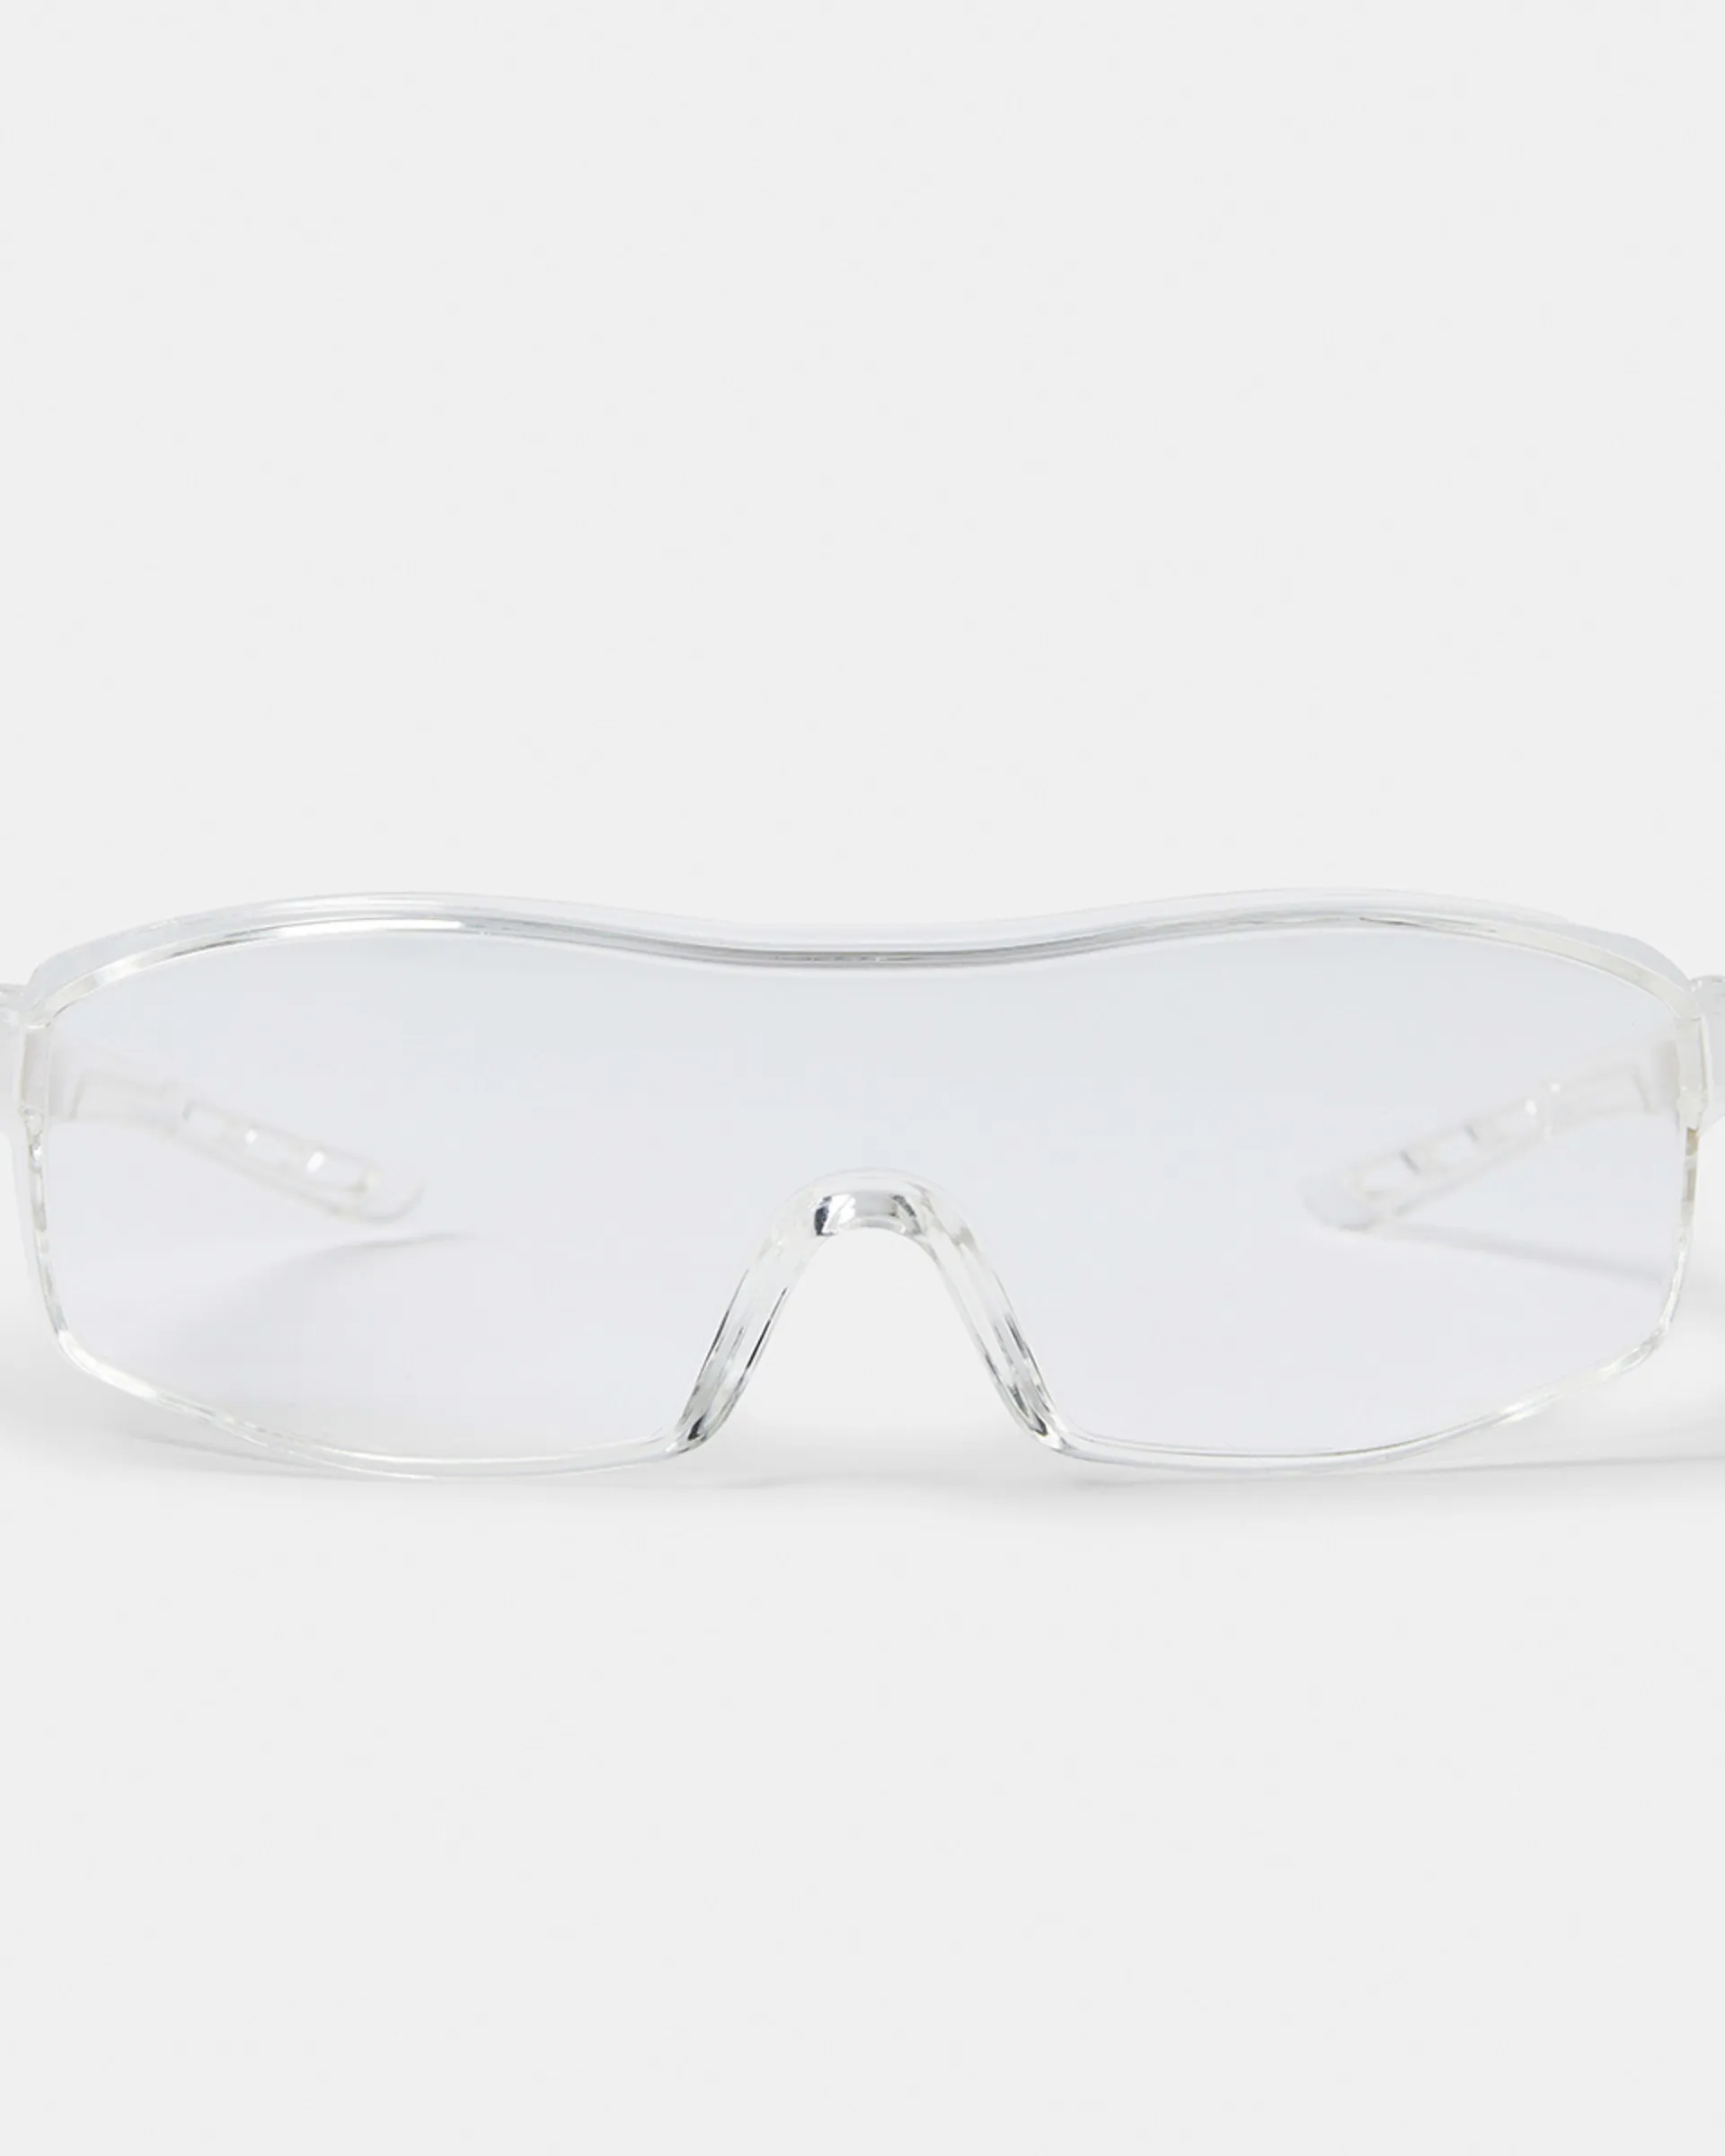 Workwear Safety Glasses